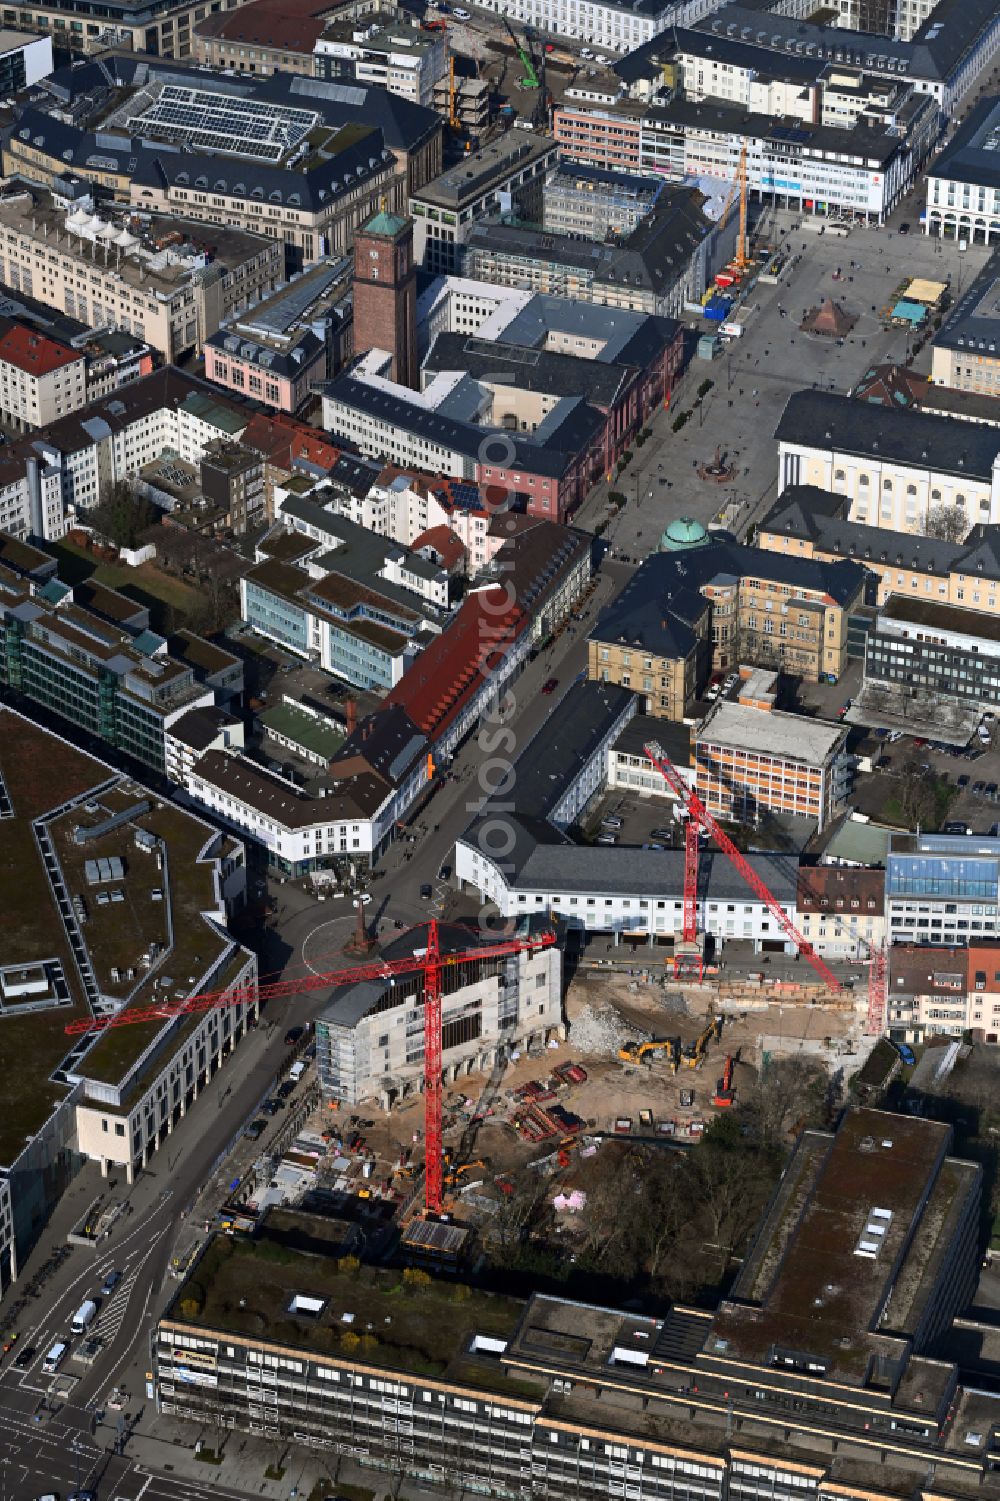 Aerial photograph Karlsruhe - Construction site for the redesign of the building complex and historical monument Margravial Palace on Karl-Friedrich-Strasse Rondellplatz - Markgrafenstrasse in Karlsruhe in the state Baden-Wuerttemberg, Germany